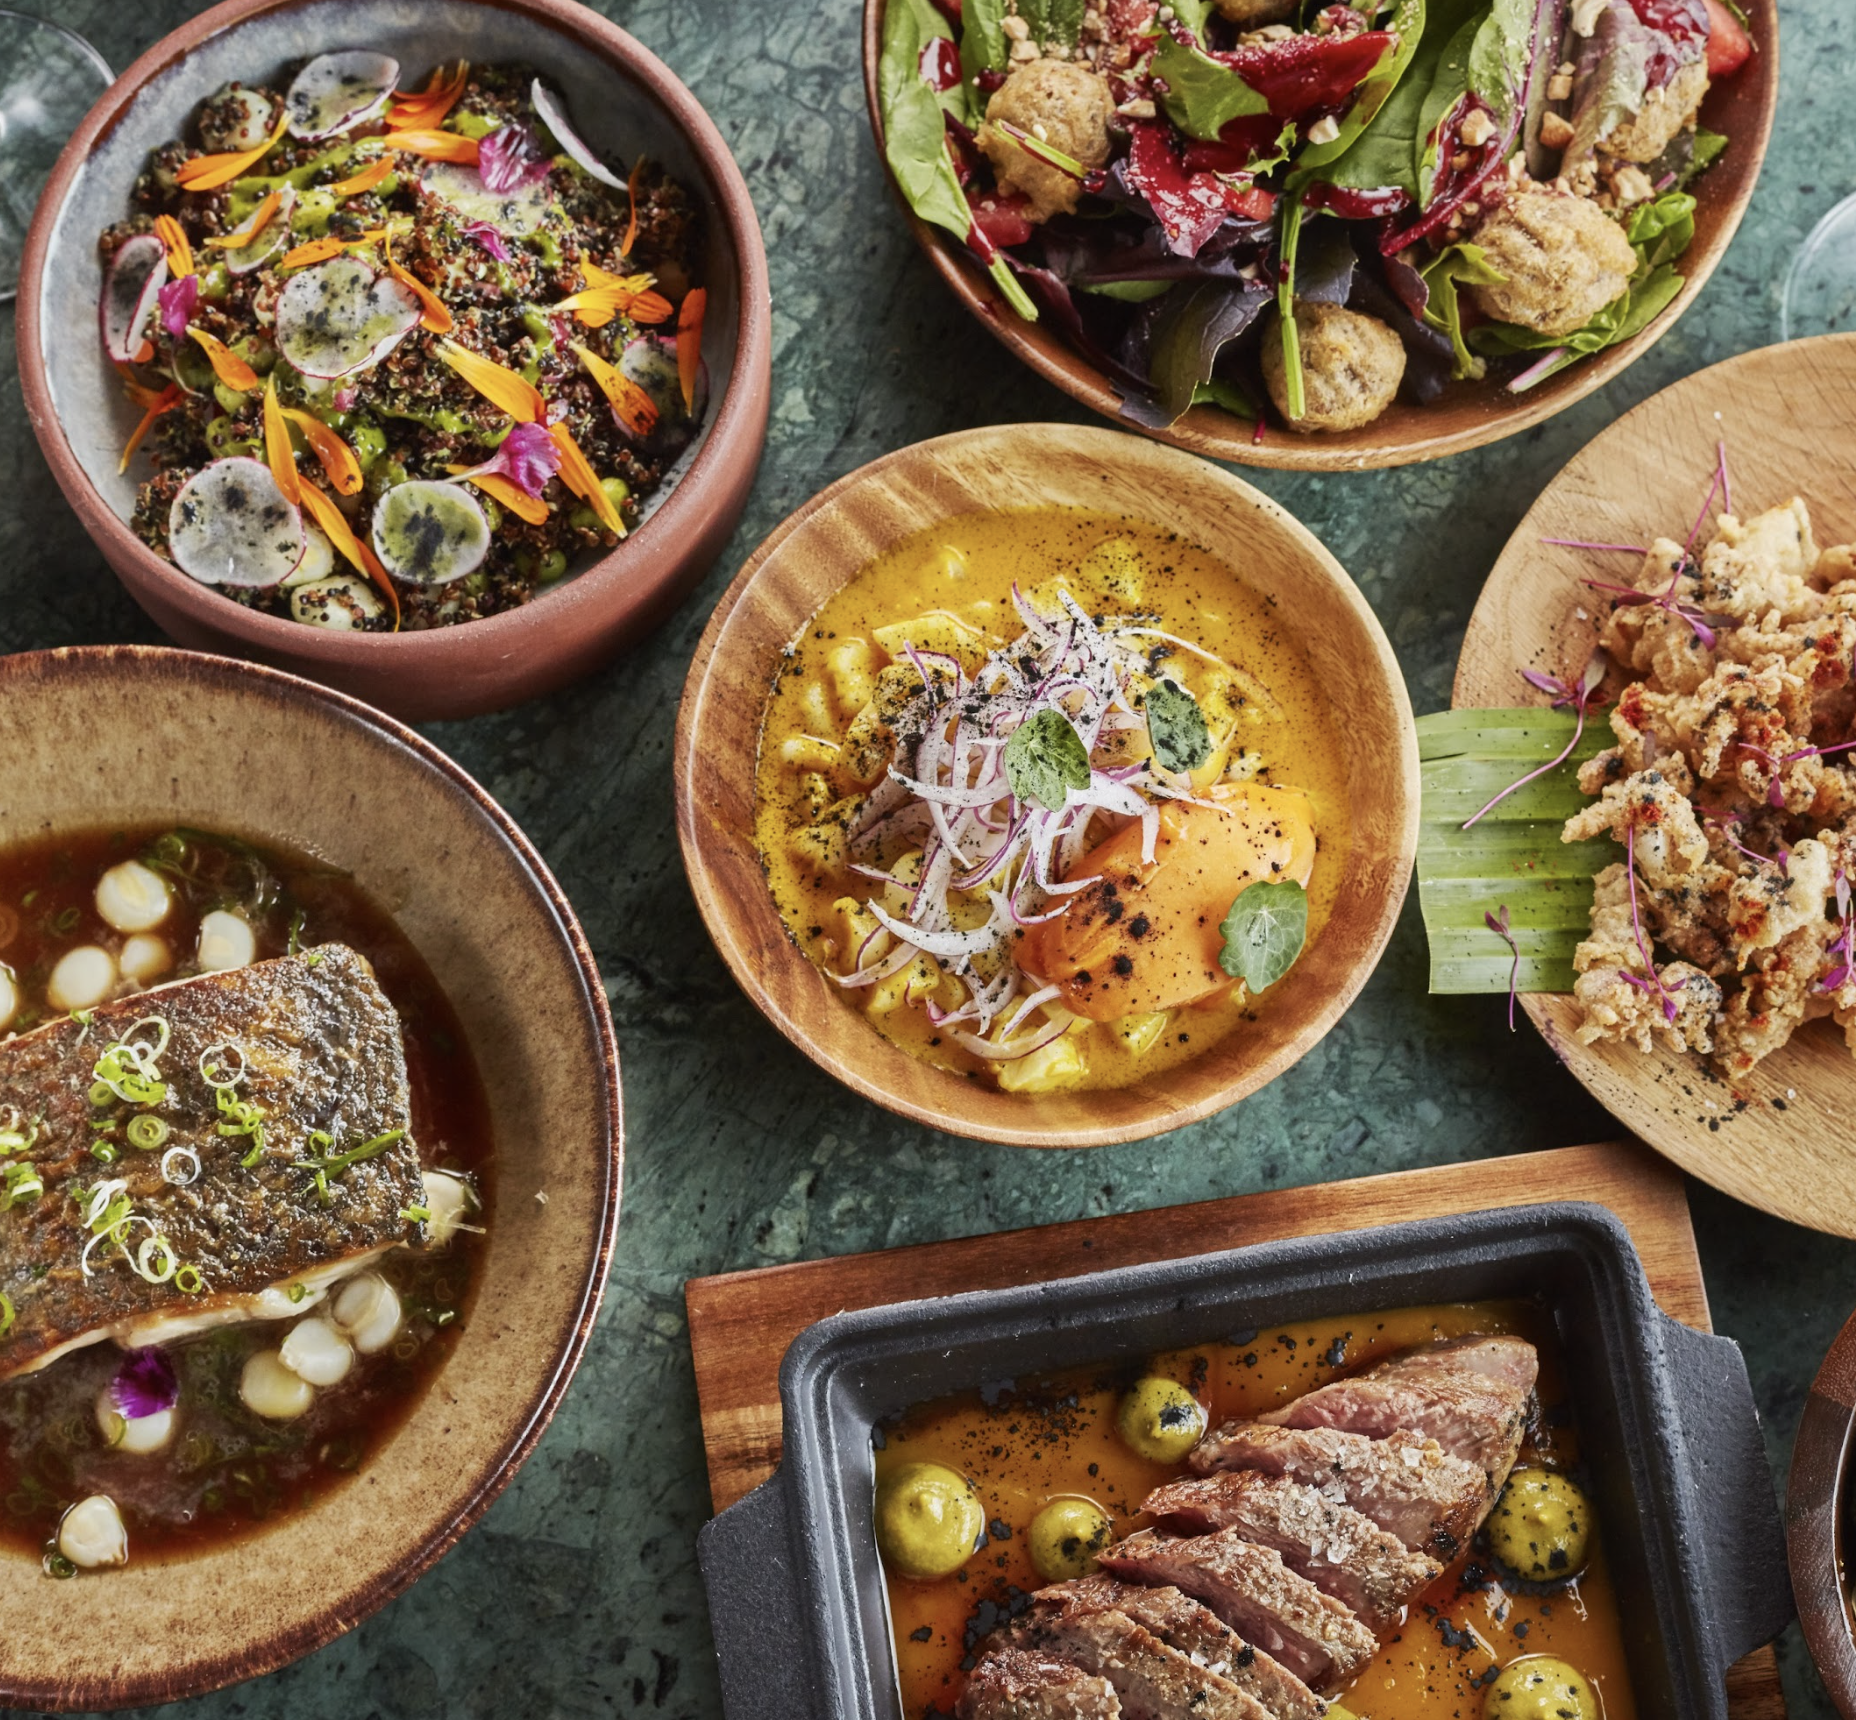 ZUAYA: showcasing life the energy and flavours of Latin America